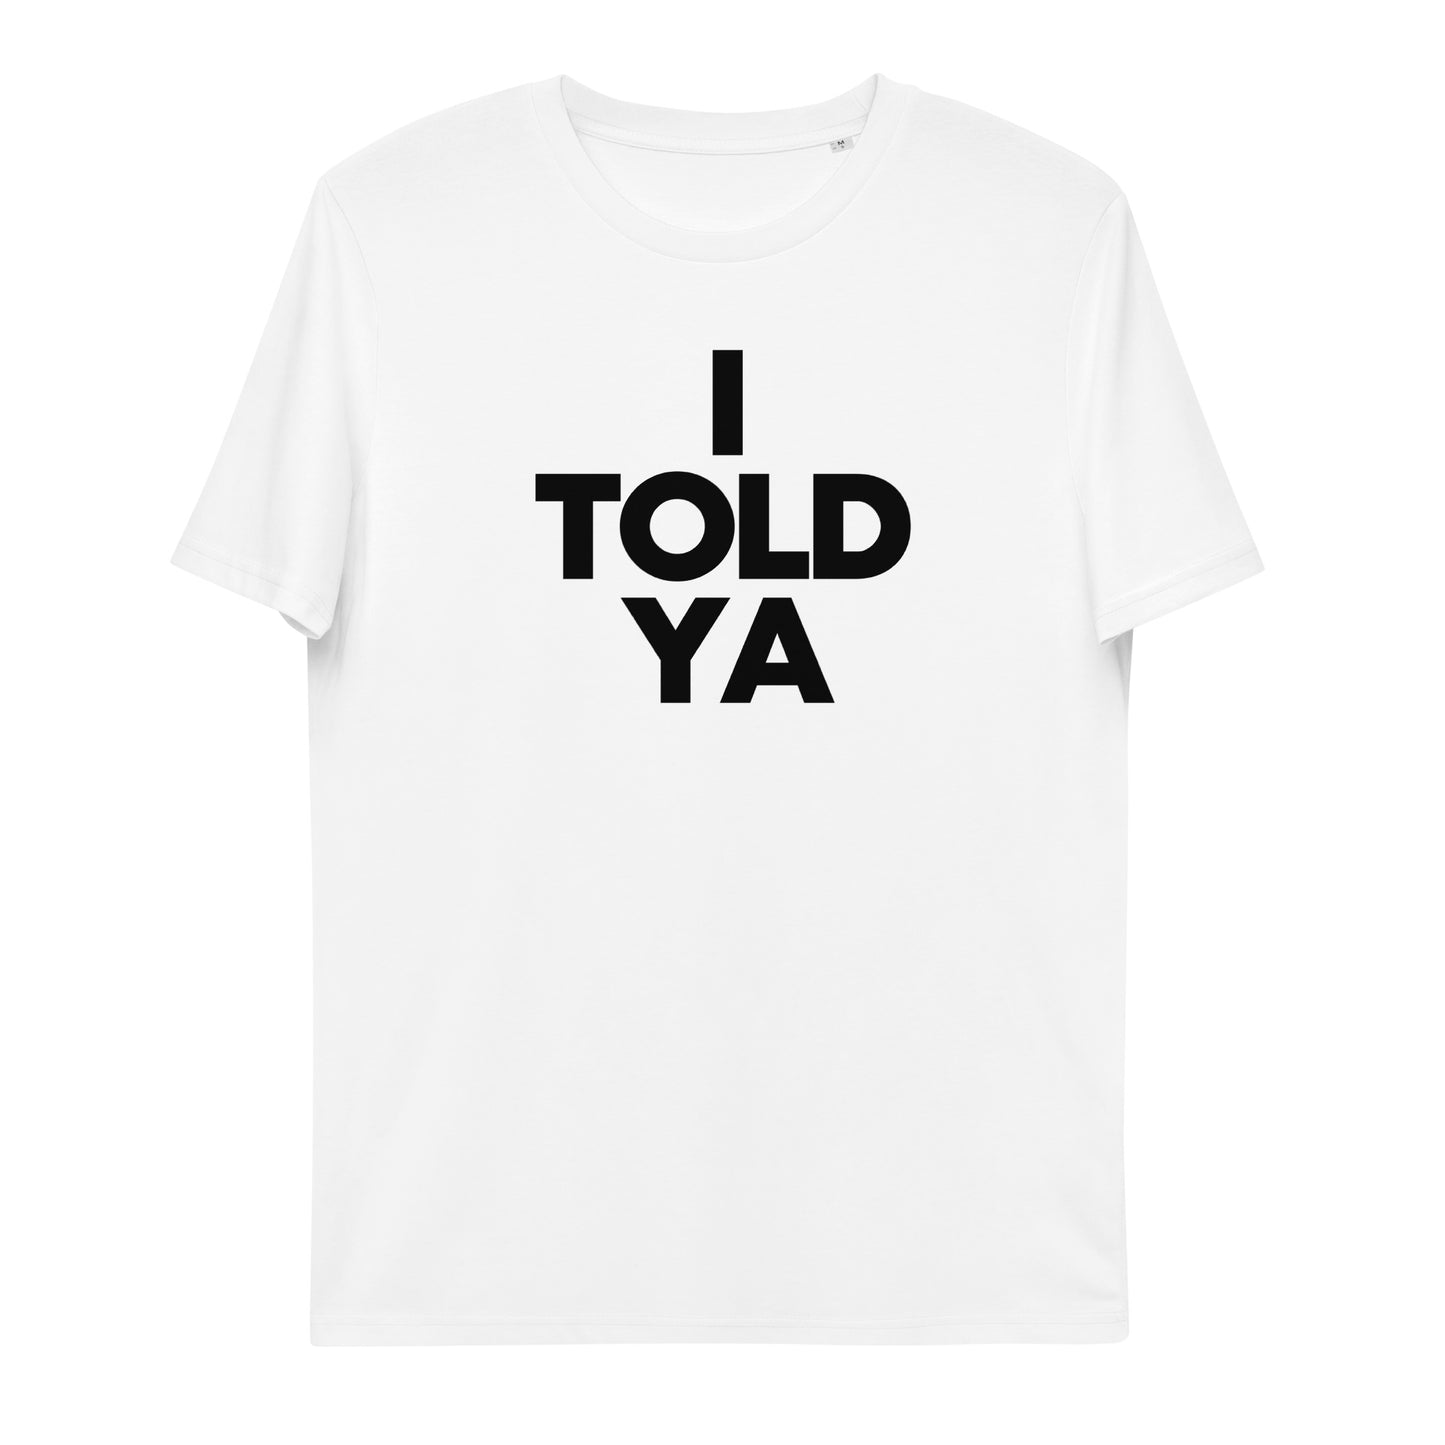 I TOLD YA t-shirt. White unisex. John John Kennedy. Clothes With Words apparel. Zendaya on the Callengers Film.